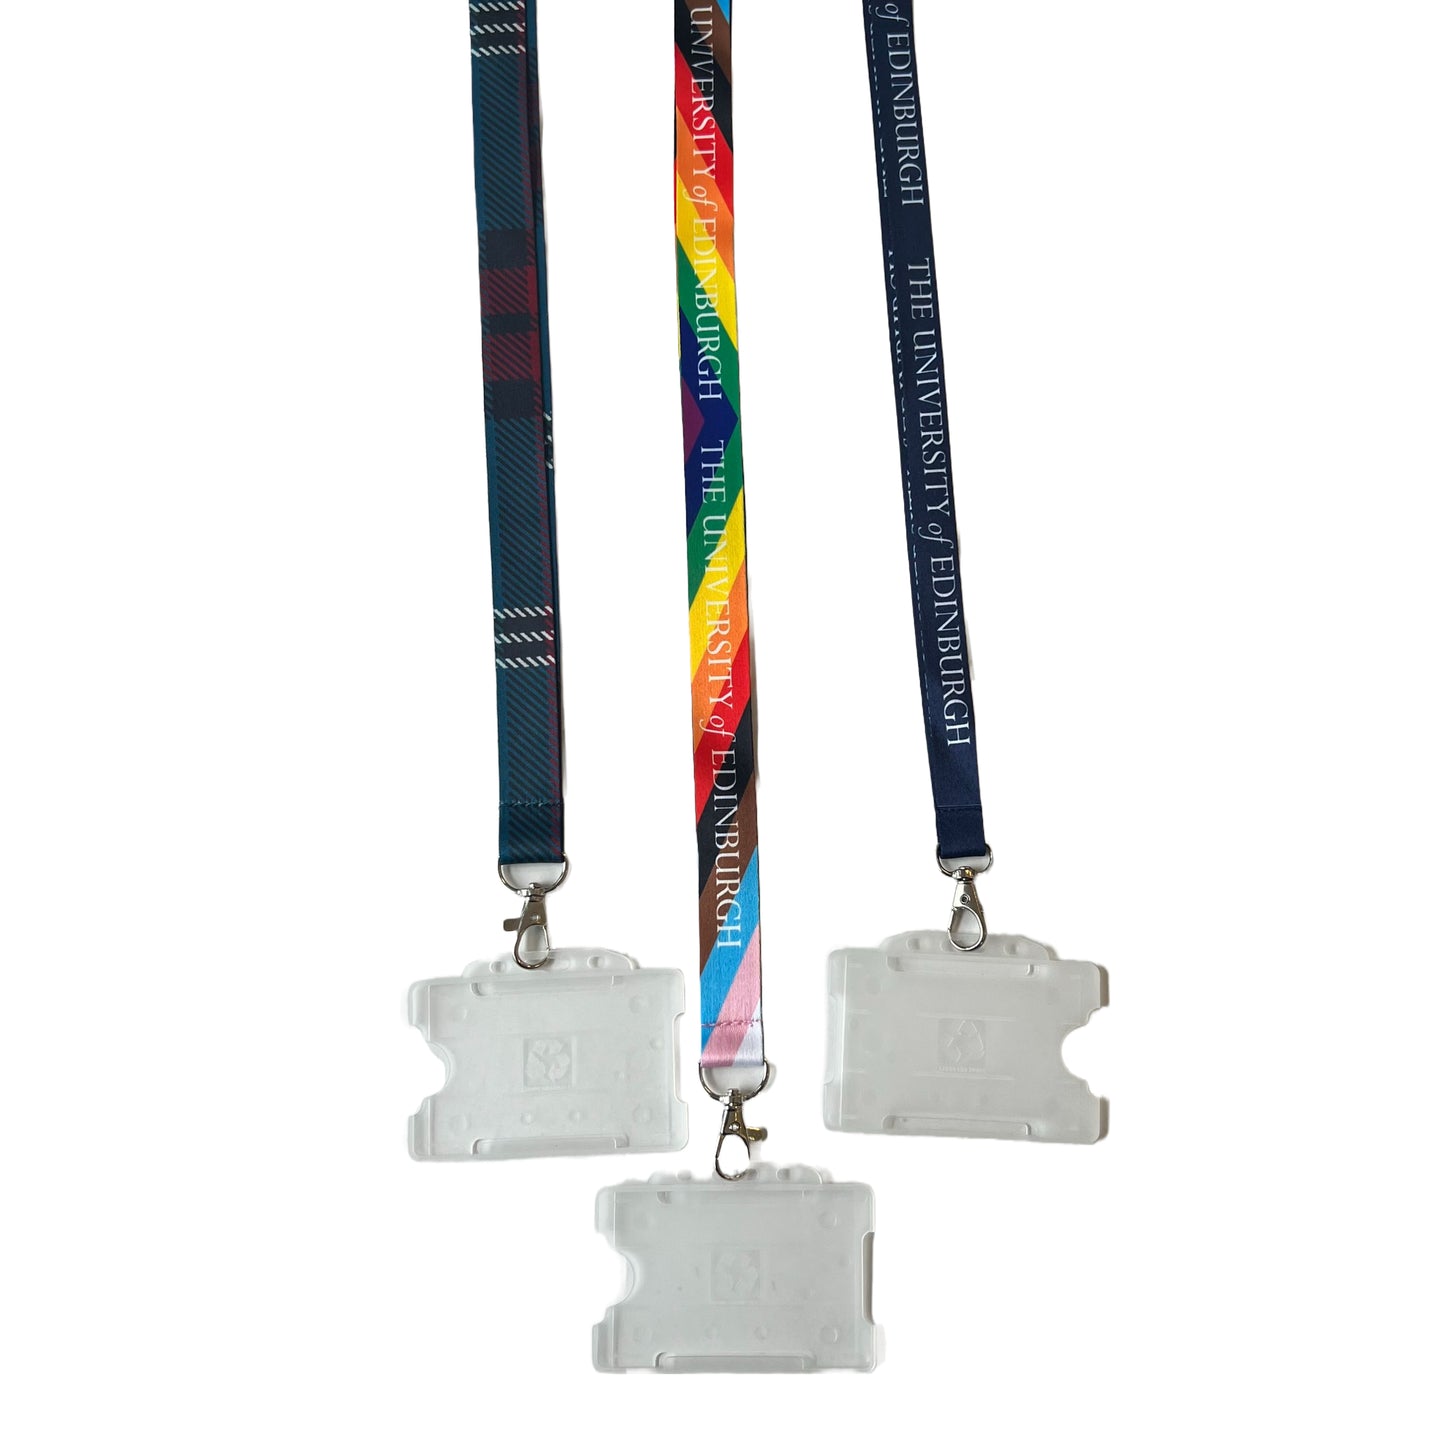 The navy blue lanyard is pictured on the right. In the middle our progress lanyard that says 'University of Edinburgh' in white text and a plastic cardholder. On the left is the University tartan lanyard with plastic cardholder.